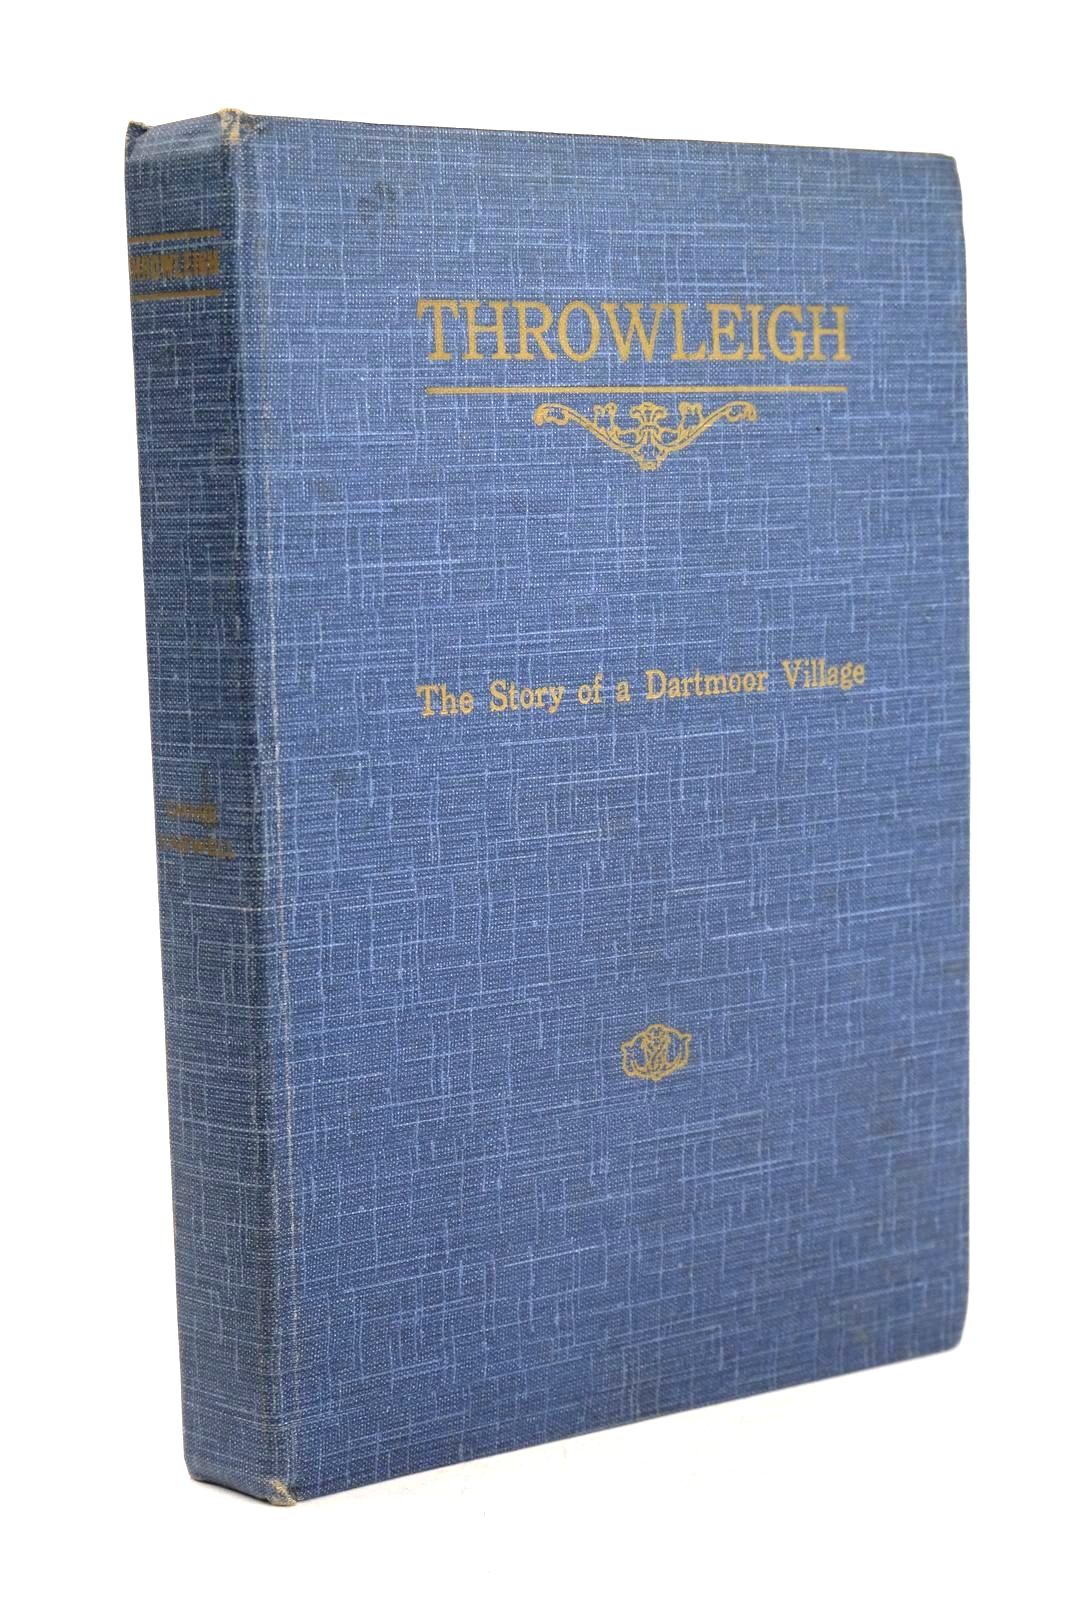 Photo of THROWLEIGH: THE STORY OF A DARTMOOR VILLAGE- Stock Number: 1326575